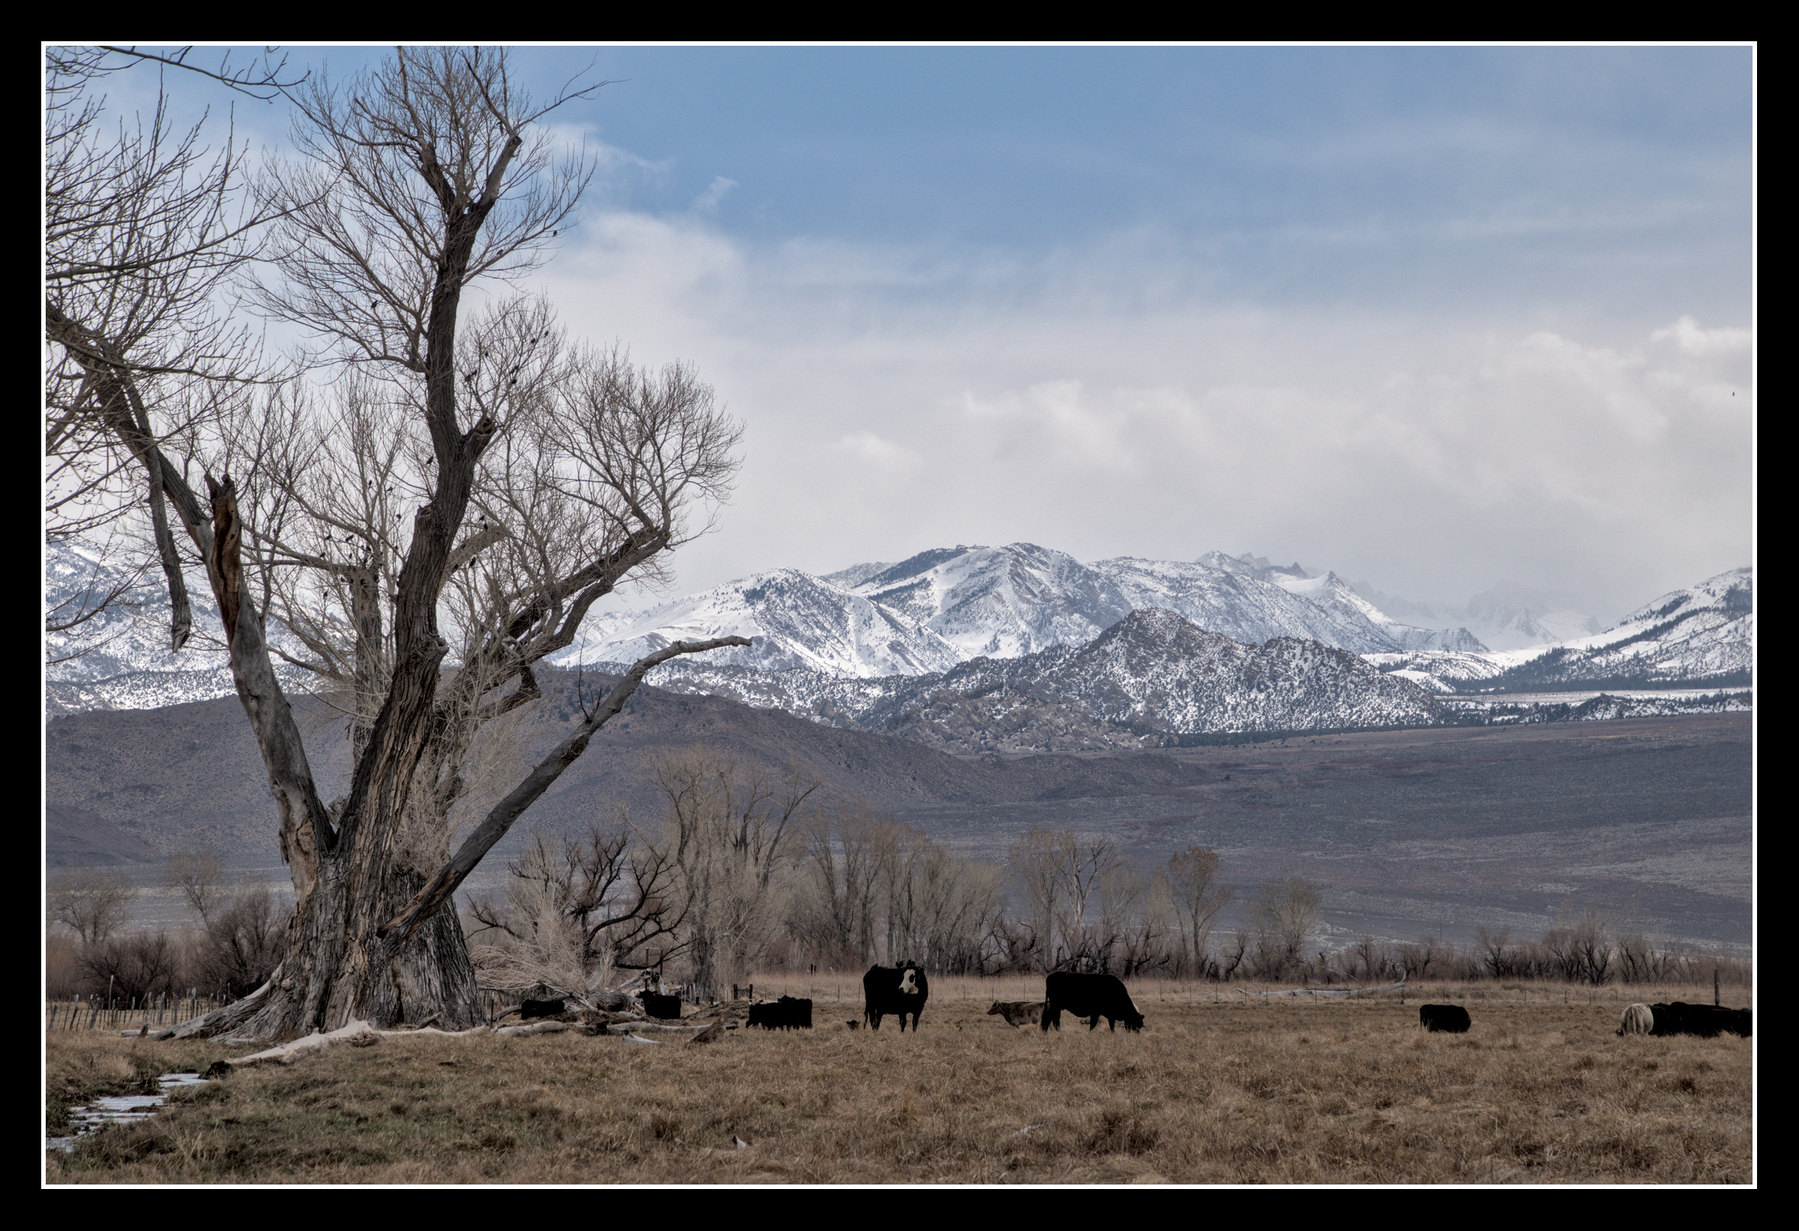 A large cottonwood tree has many birds in it, standing in a pasture with cows below.  Snow-capped mountains can be seen in the distance.